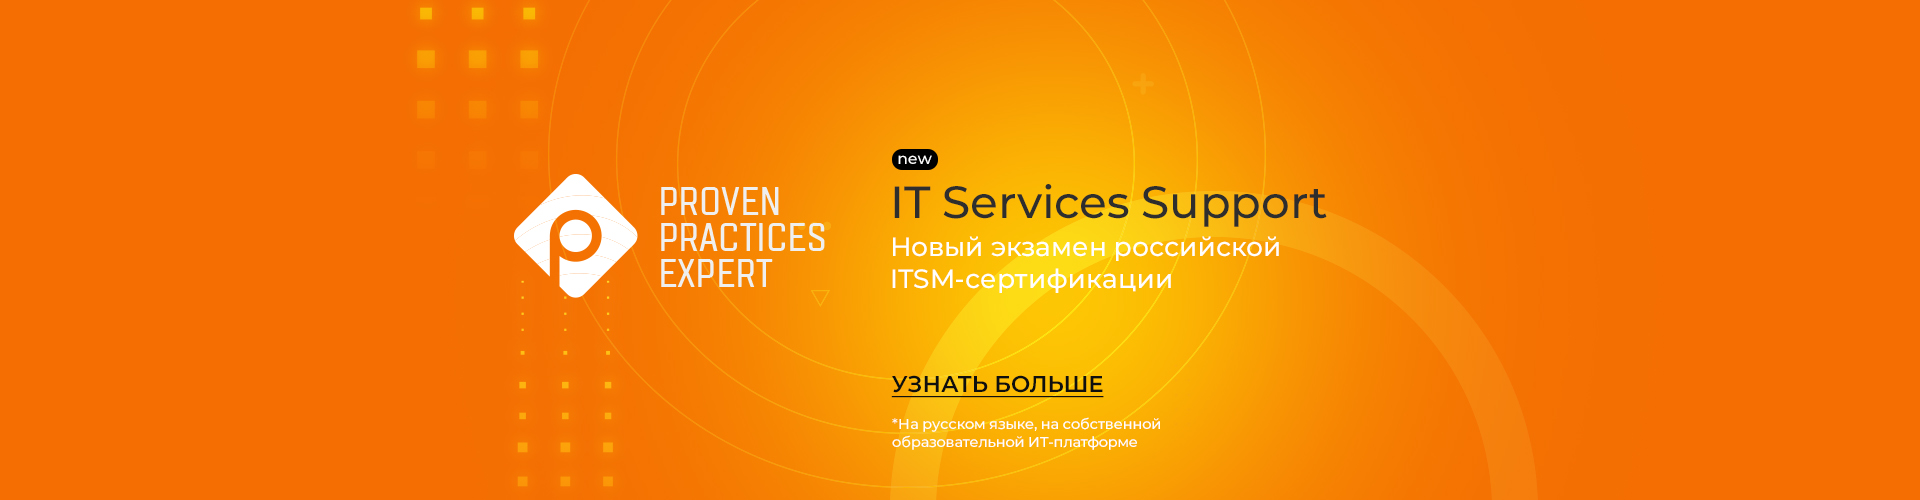 Proven Practices Expert: IT Services Support